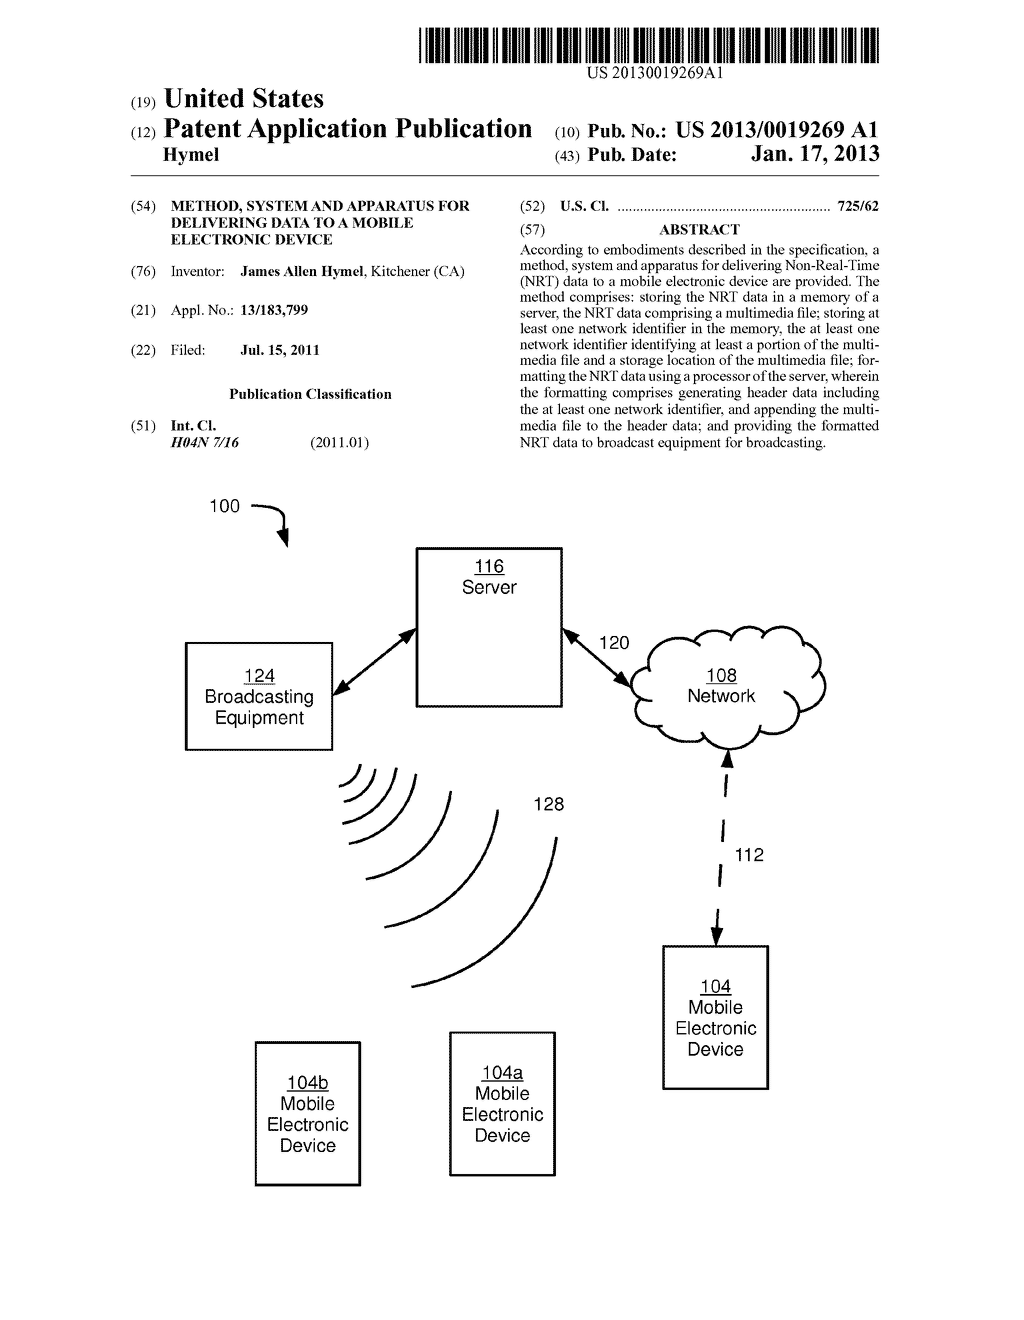 METHOD, SYSTEM AND APPARATUS FOR DELIVERING DATA TO A MOBILE ELECTRONIC     DEVICEAANM Hymel; James AllenAACI KitchenerAACO CAAAGP Hymel; James Allen Kitchener CA - diagram, schematic, and image 01